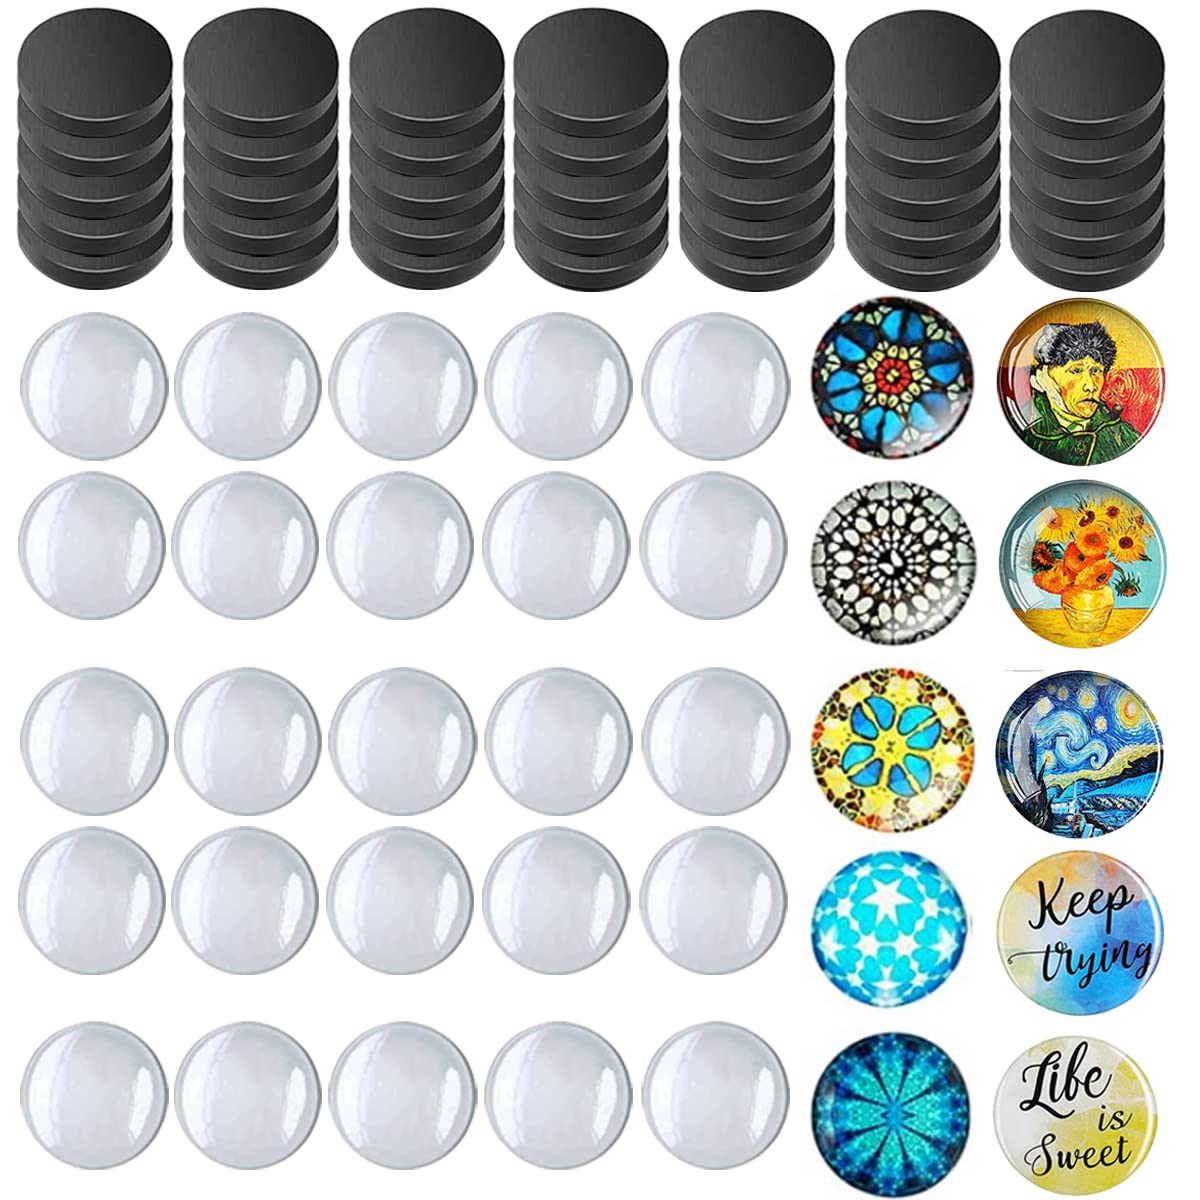 80pcs Crafts Fridge Magnets Glass Ceramic Ferrite Magnet and Transparent  Clear Glass Cabochons for DIY Refrigerator Office Whiteboard Magnets  Pendants E-80pcs Round Set